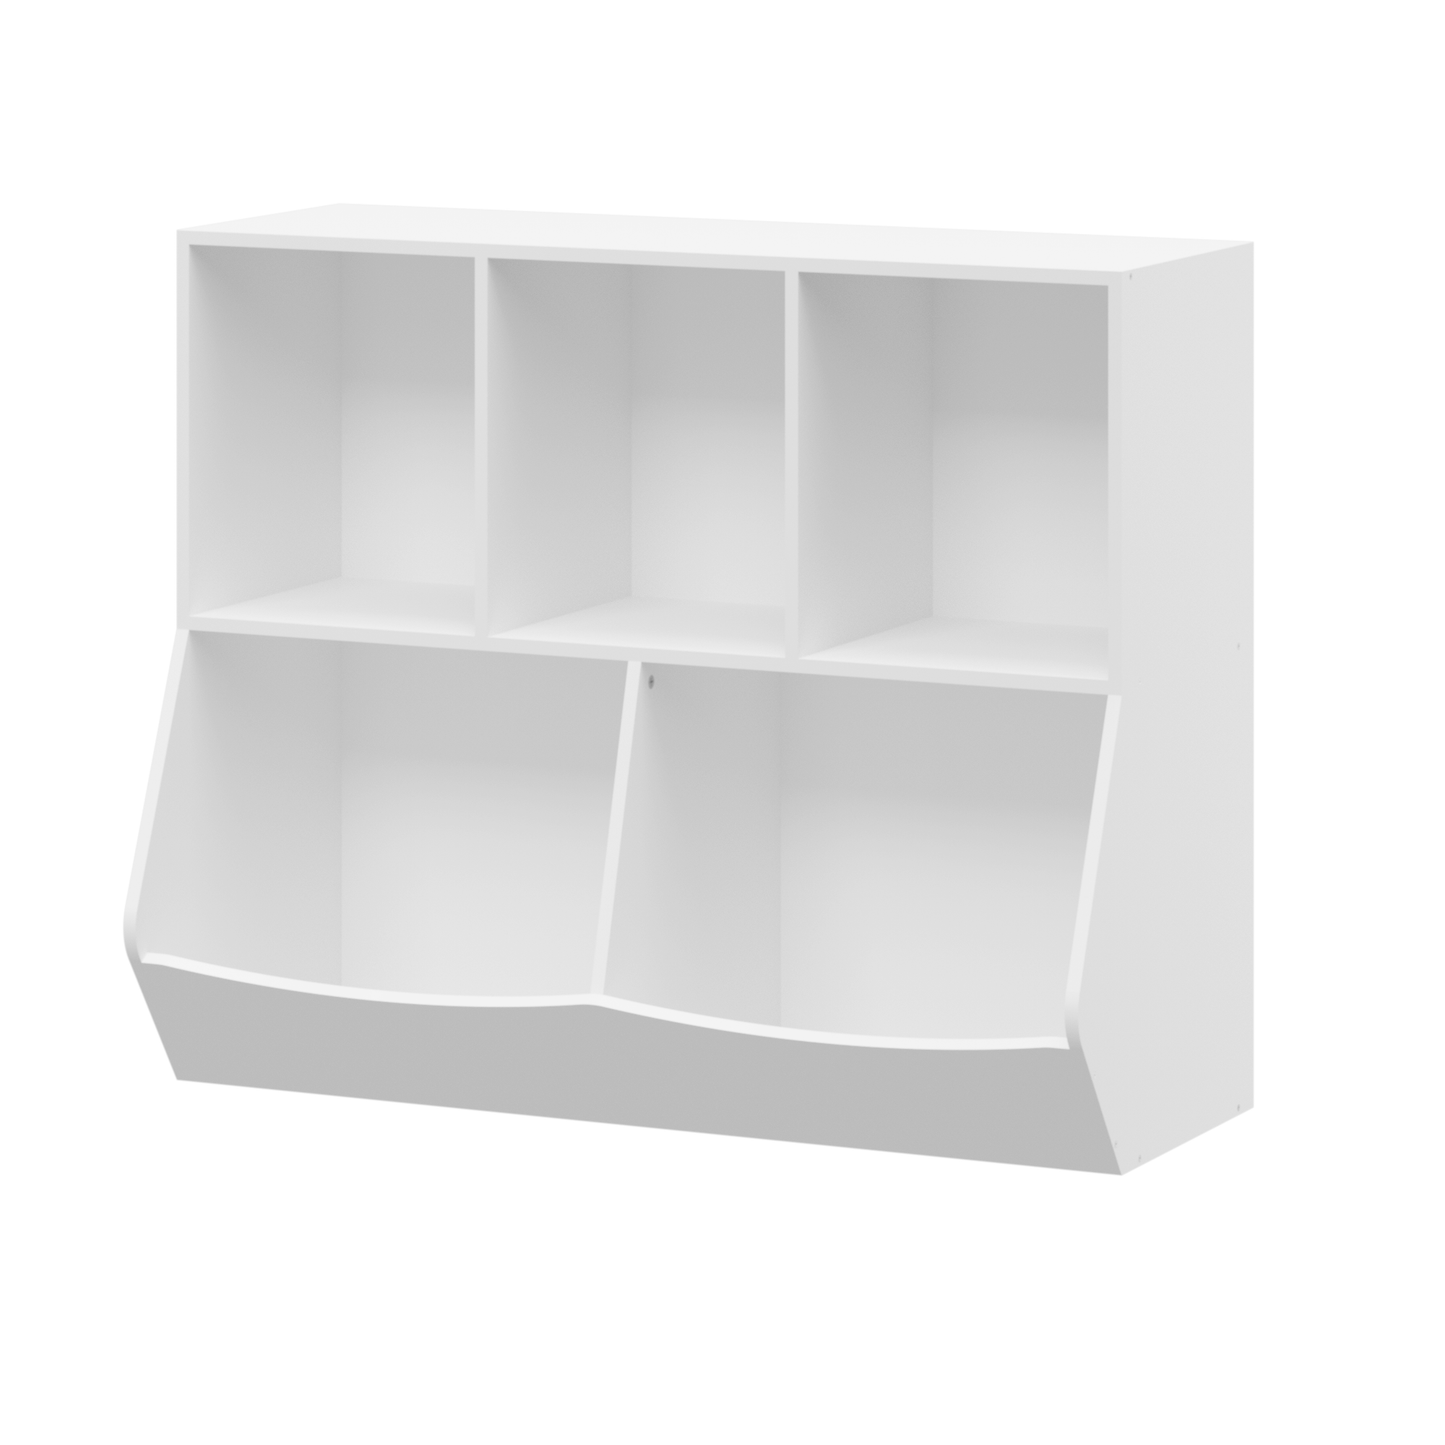 Kids Bookcase with Collapsible Fabric Drawers